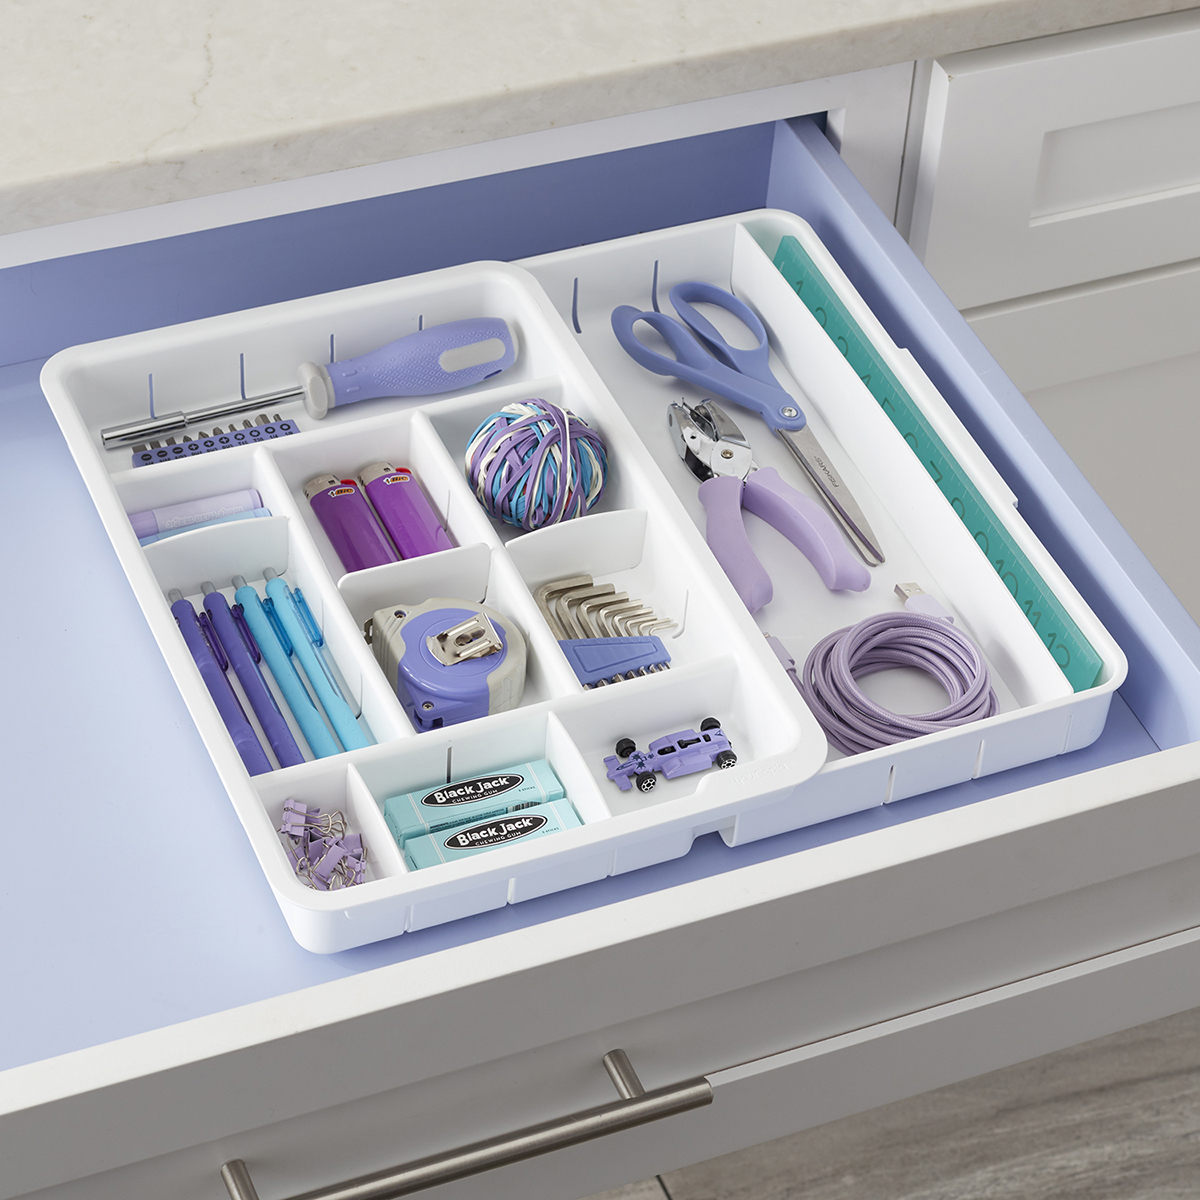 YouCopia Expandable Utensil Tray DrawerFit Organizer White One Size 